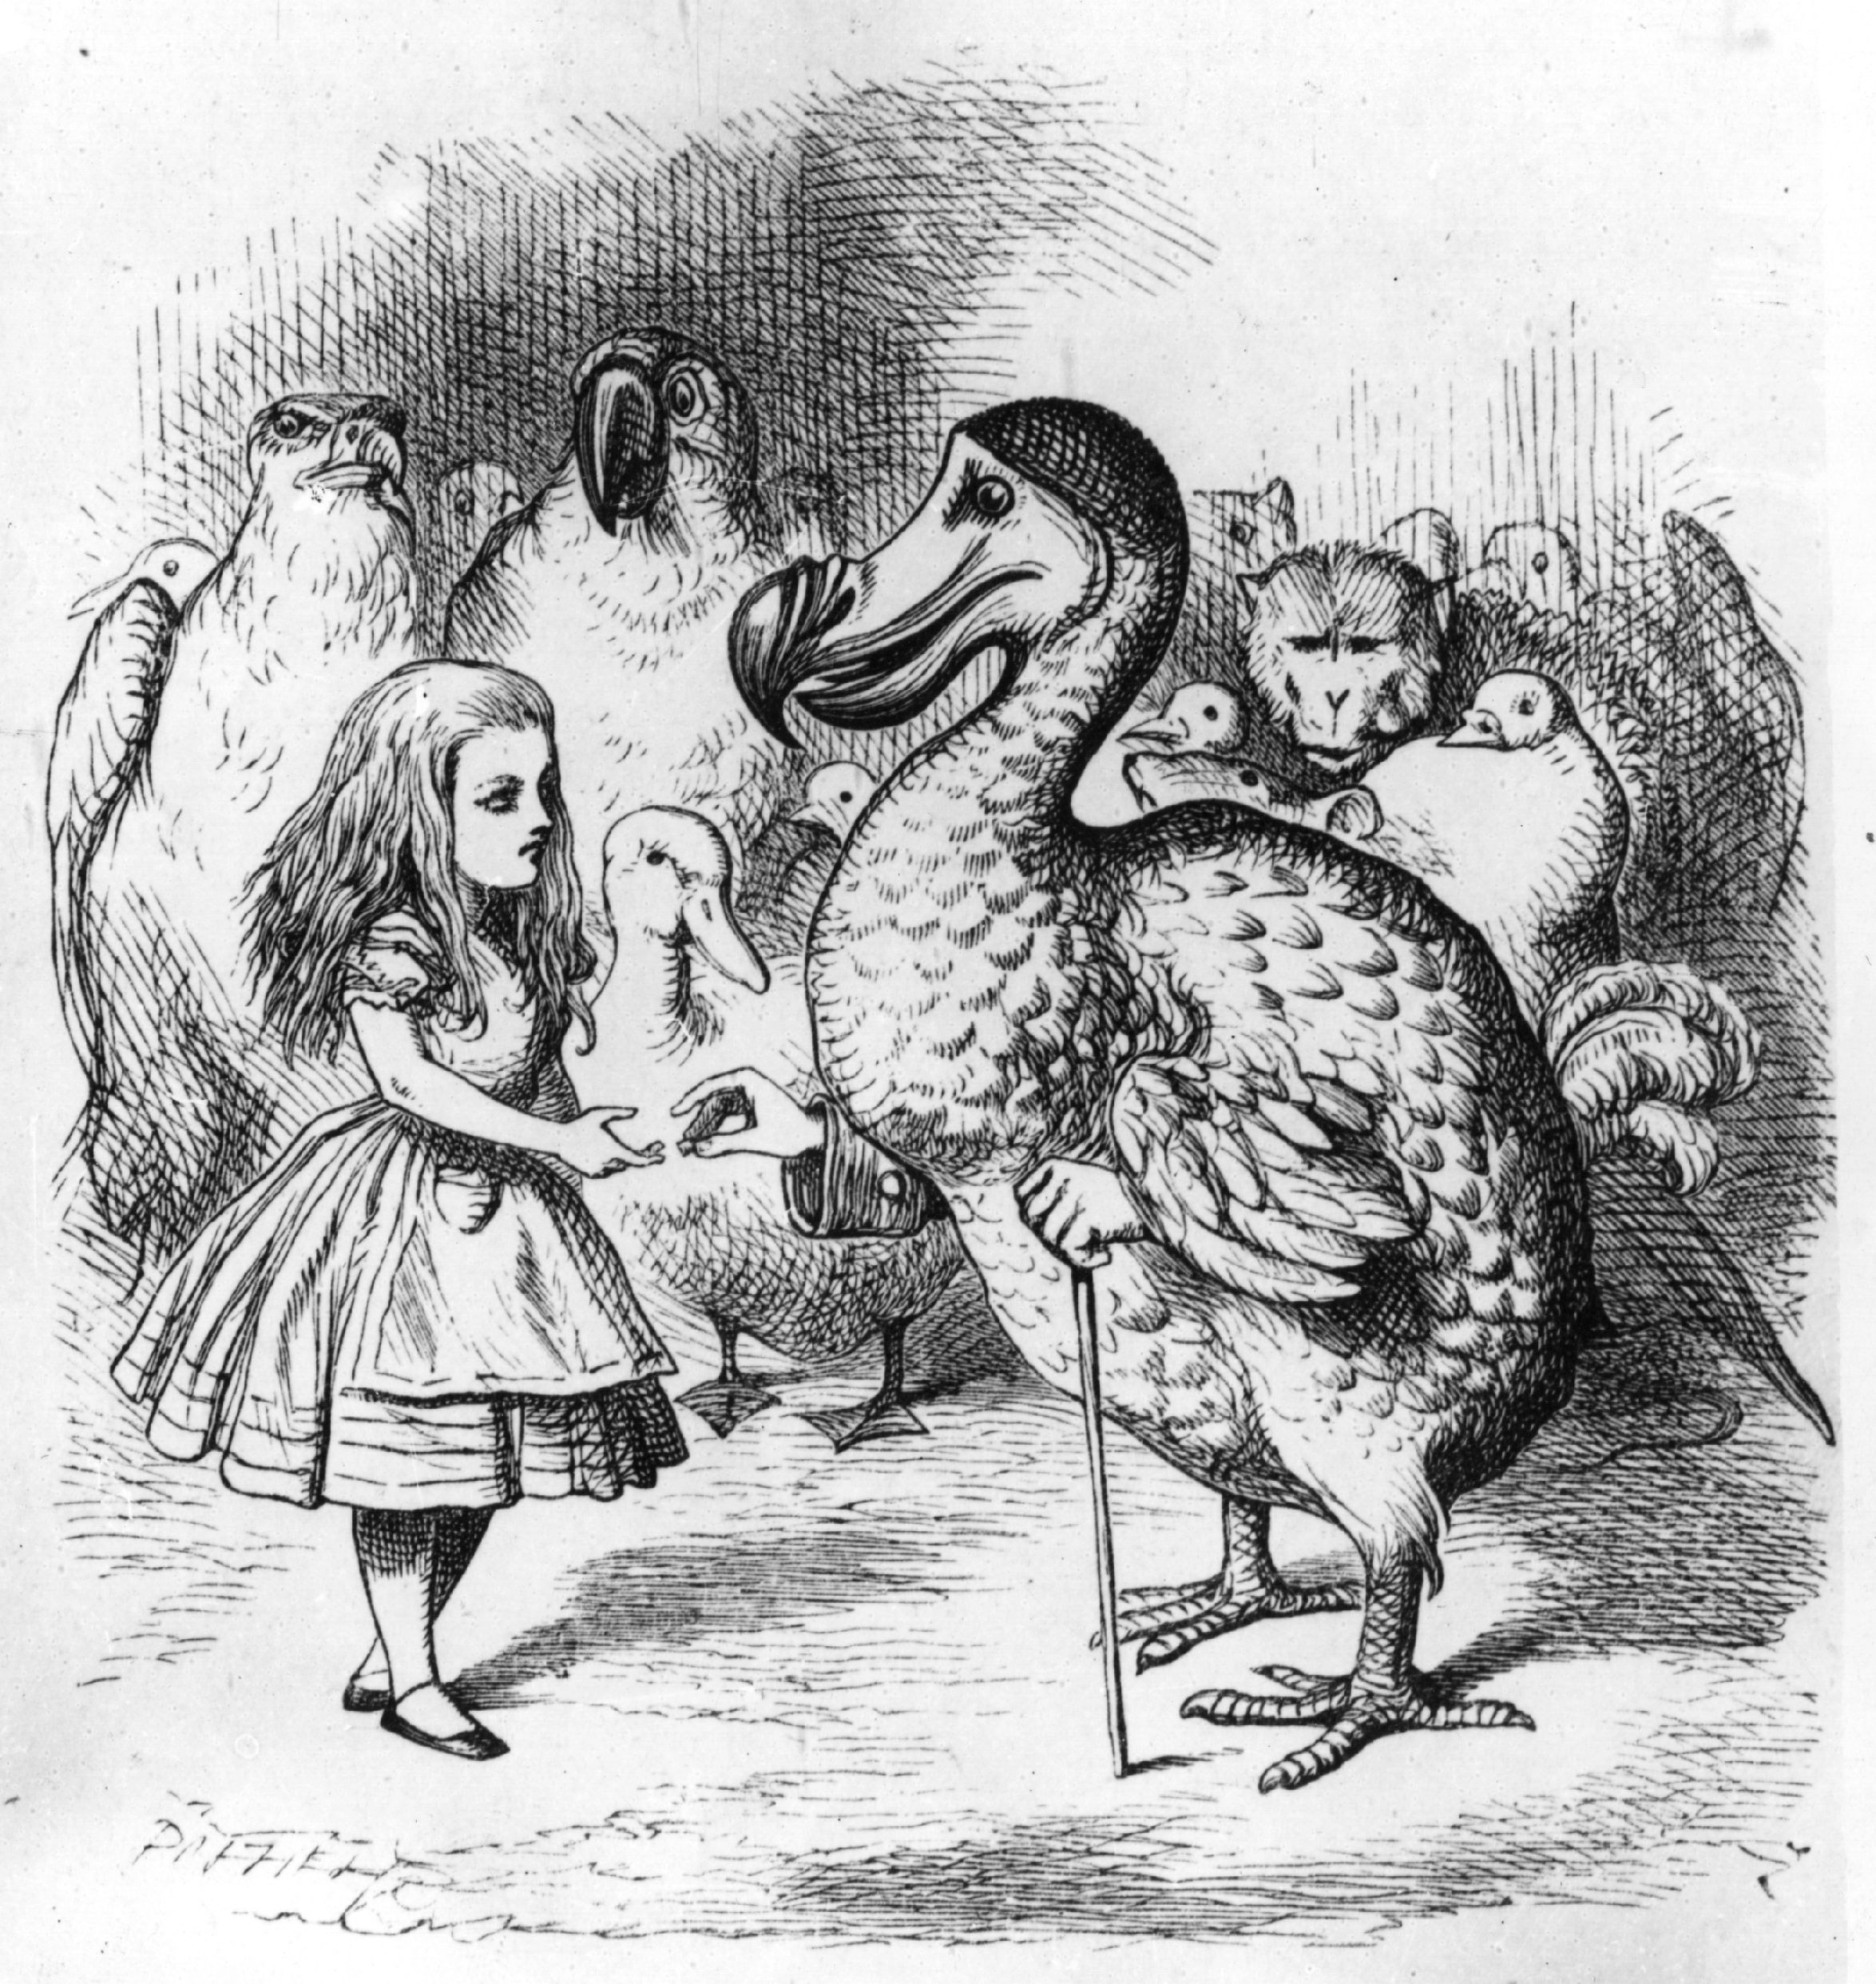 The dodo presenting Alice with a thimble, in an illustration by Tenniel from the 1st edition of 'Alice in Wonderland' by Lewis Carroll, 1865.